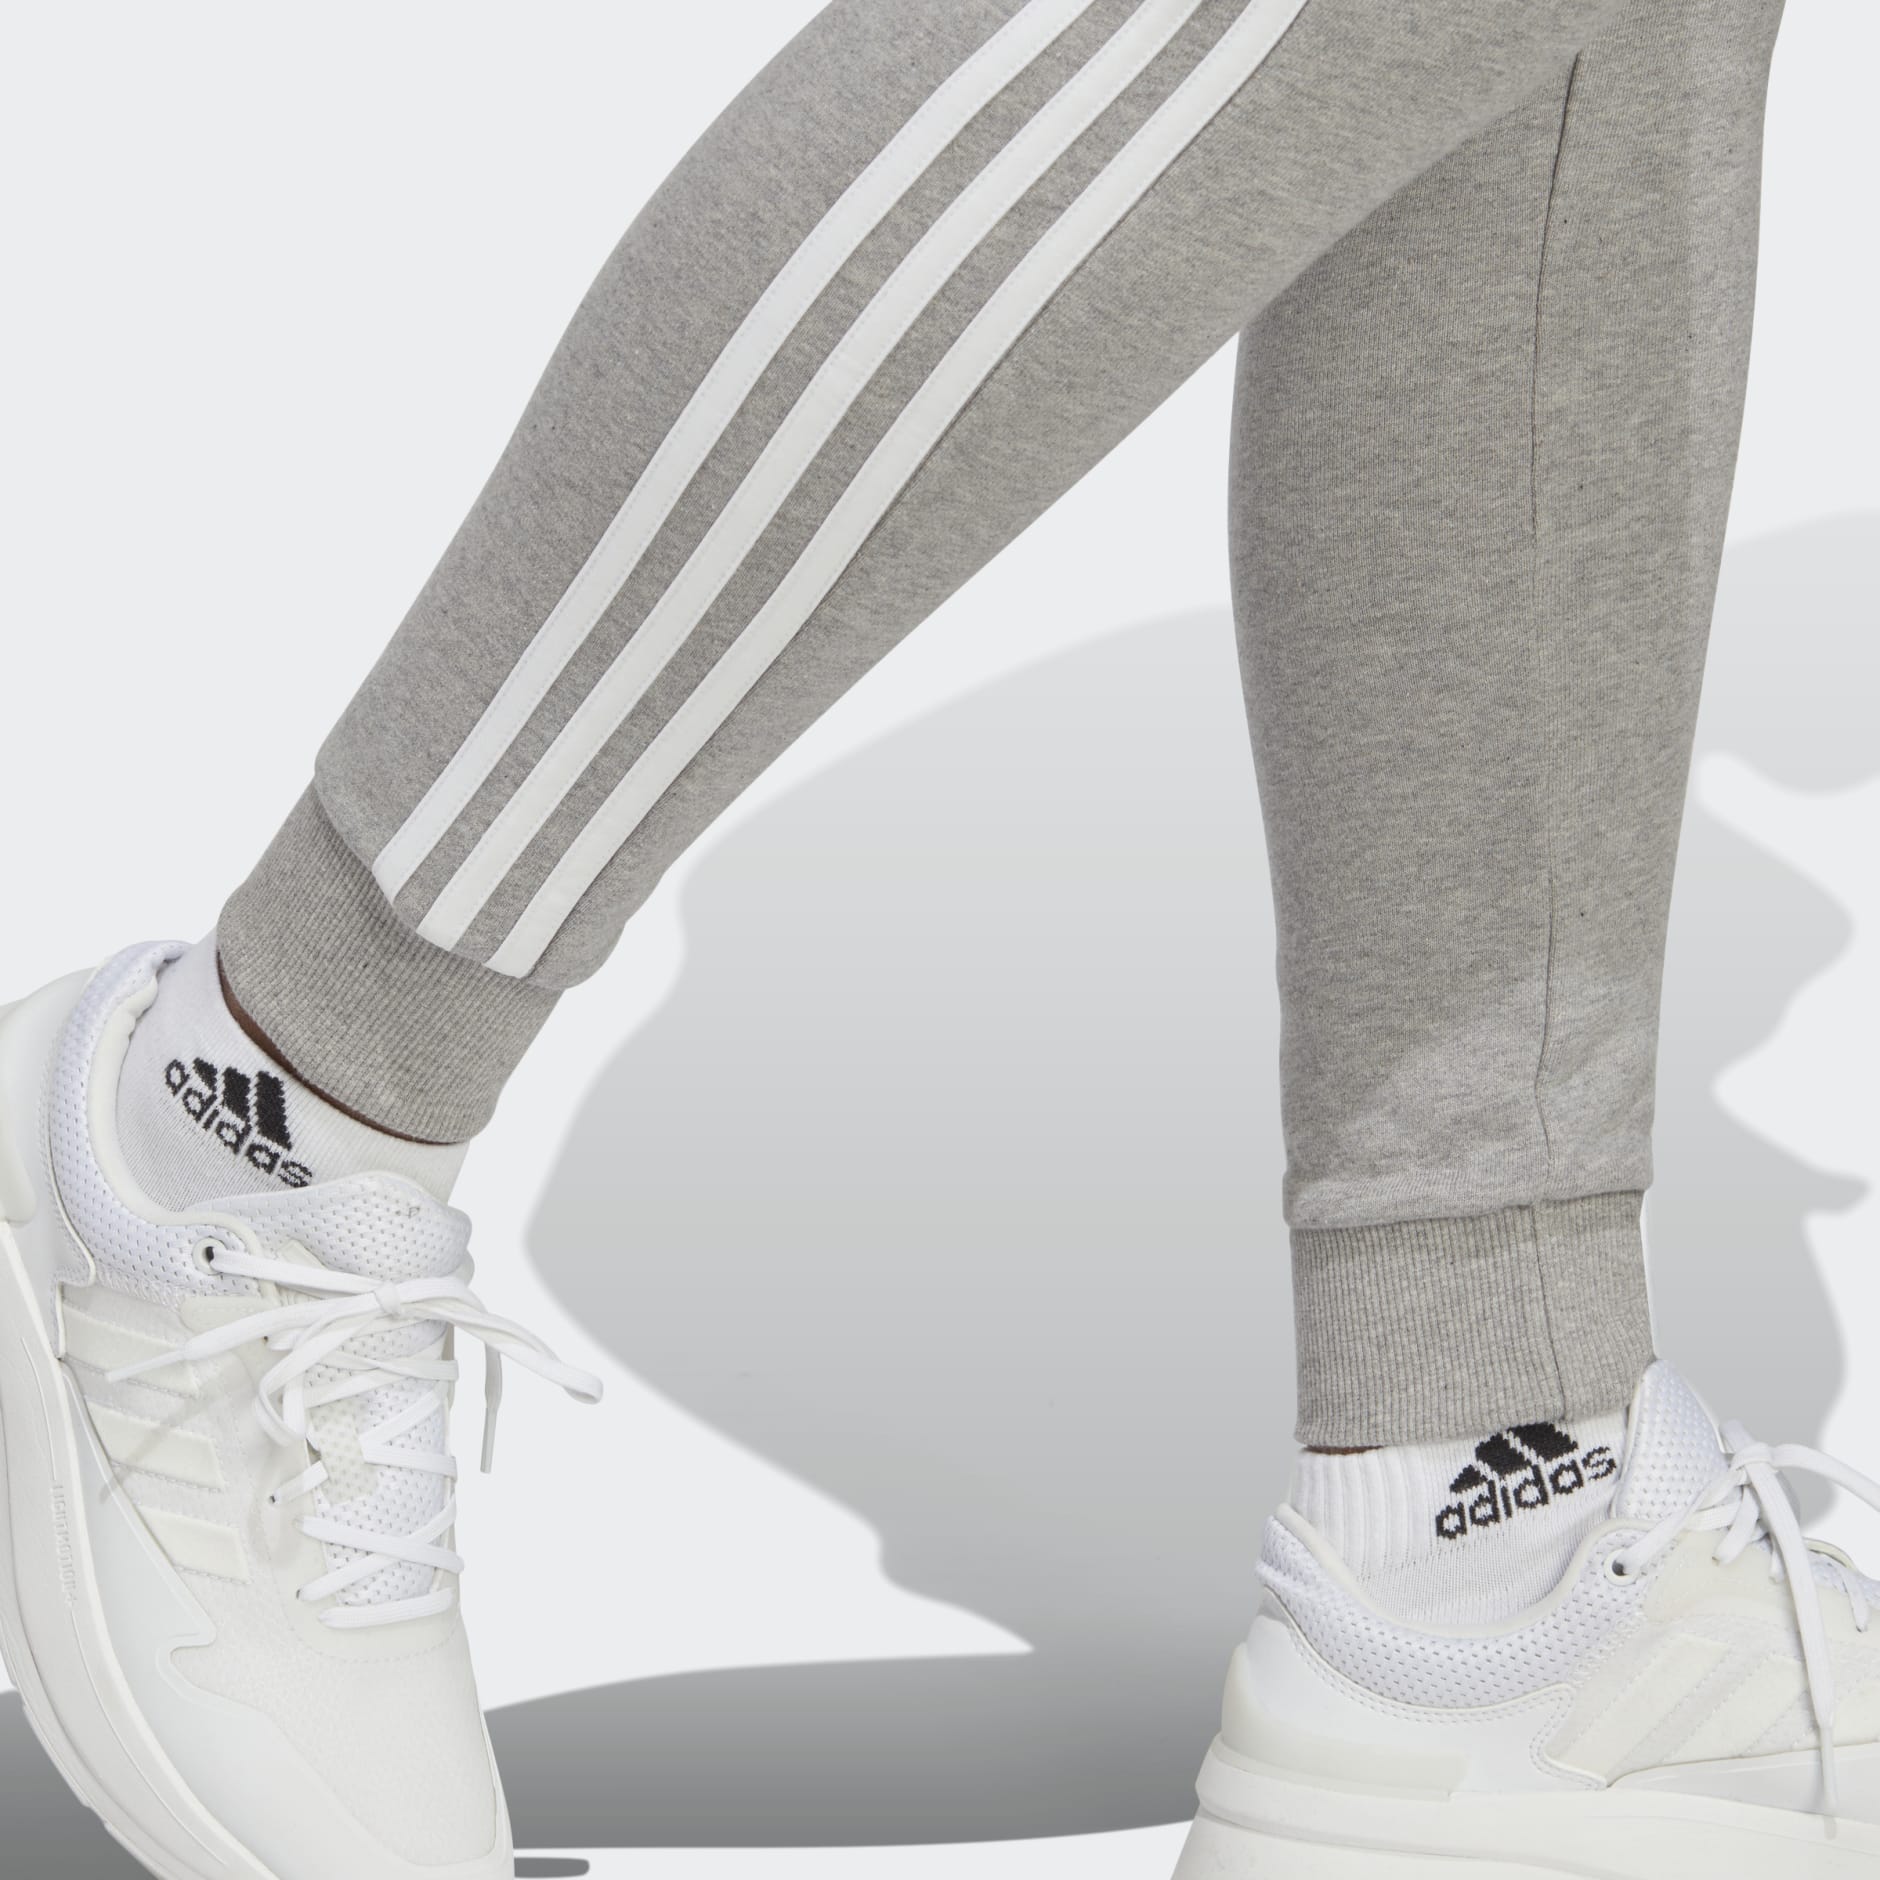 adidas Essentials 3-Stripes French Terry Cuffed Pants - Black